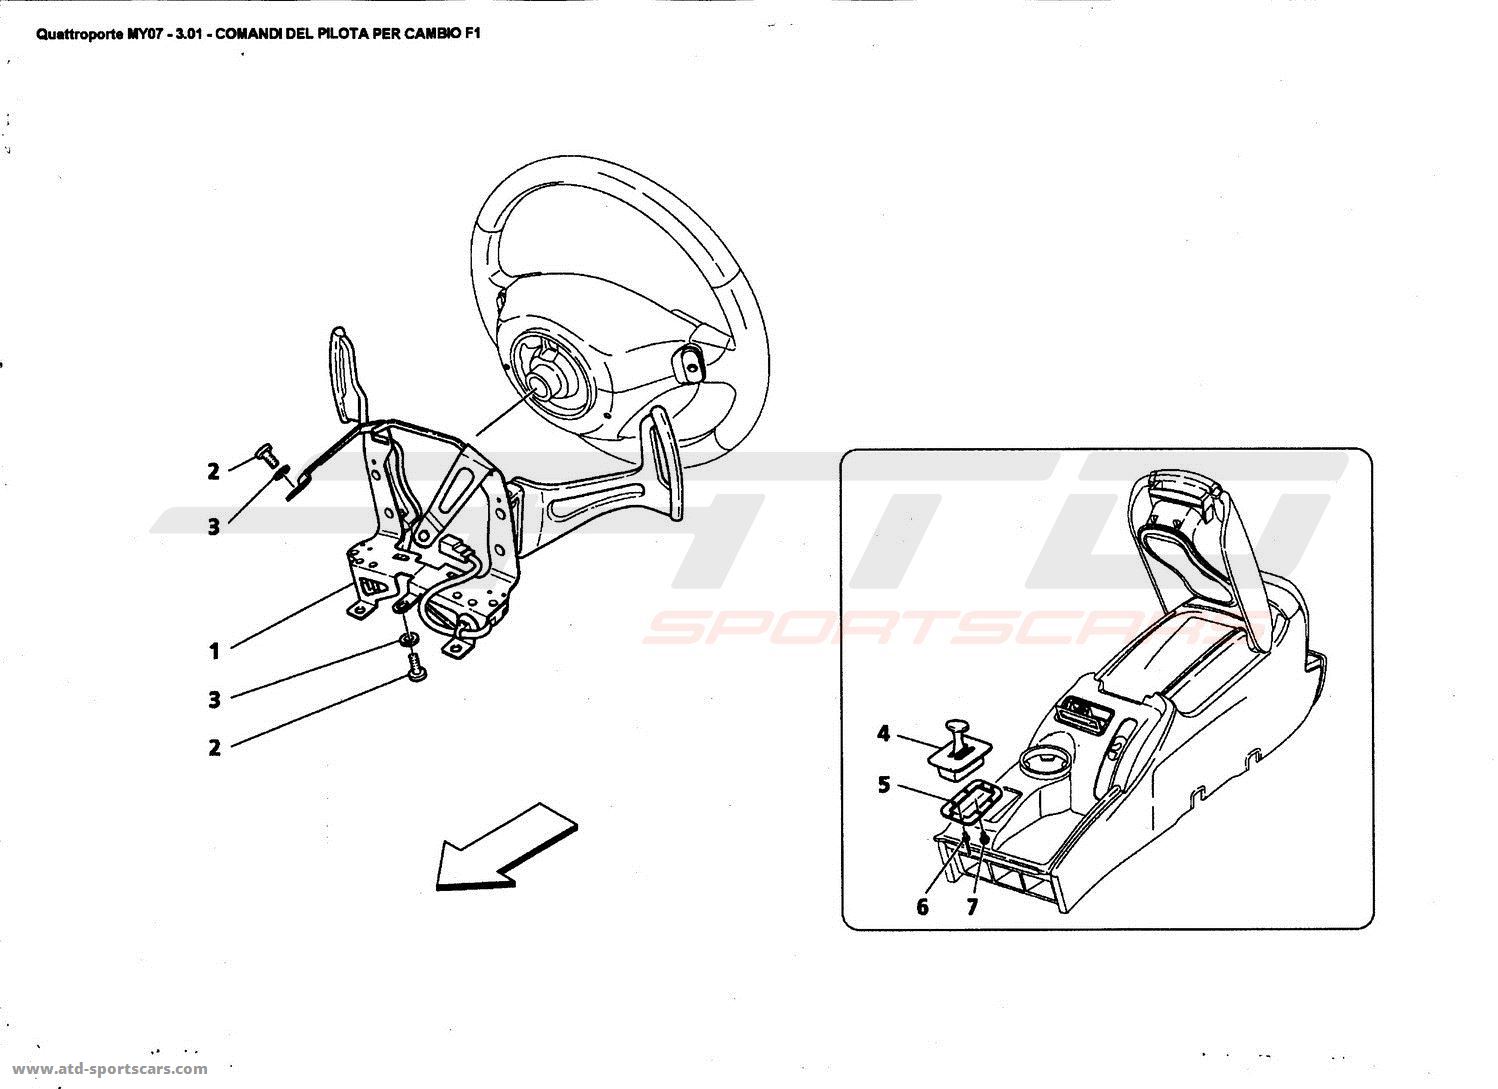 DRIVER CONTROLS FOR F1 GEARBOX